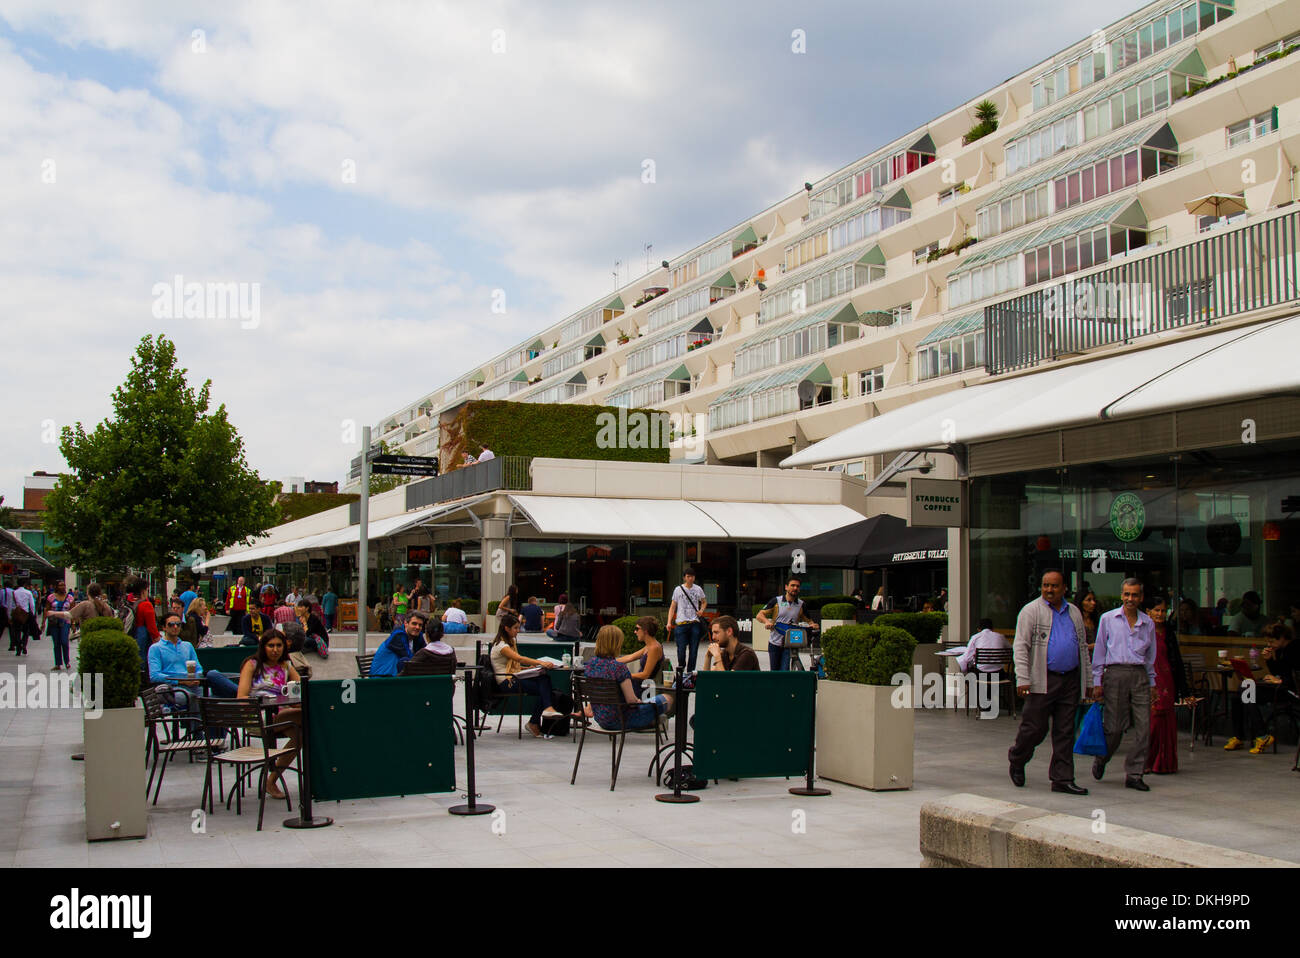 Brunswick Center Shops and apartments in Central London Stock Photo